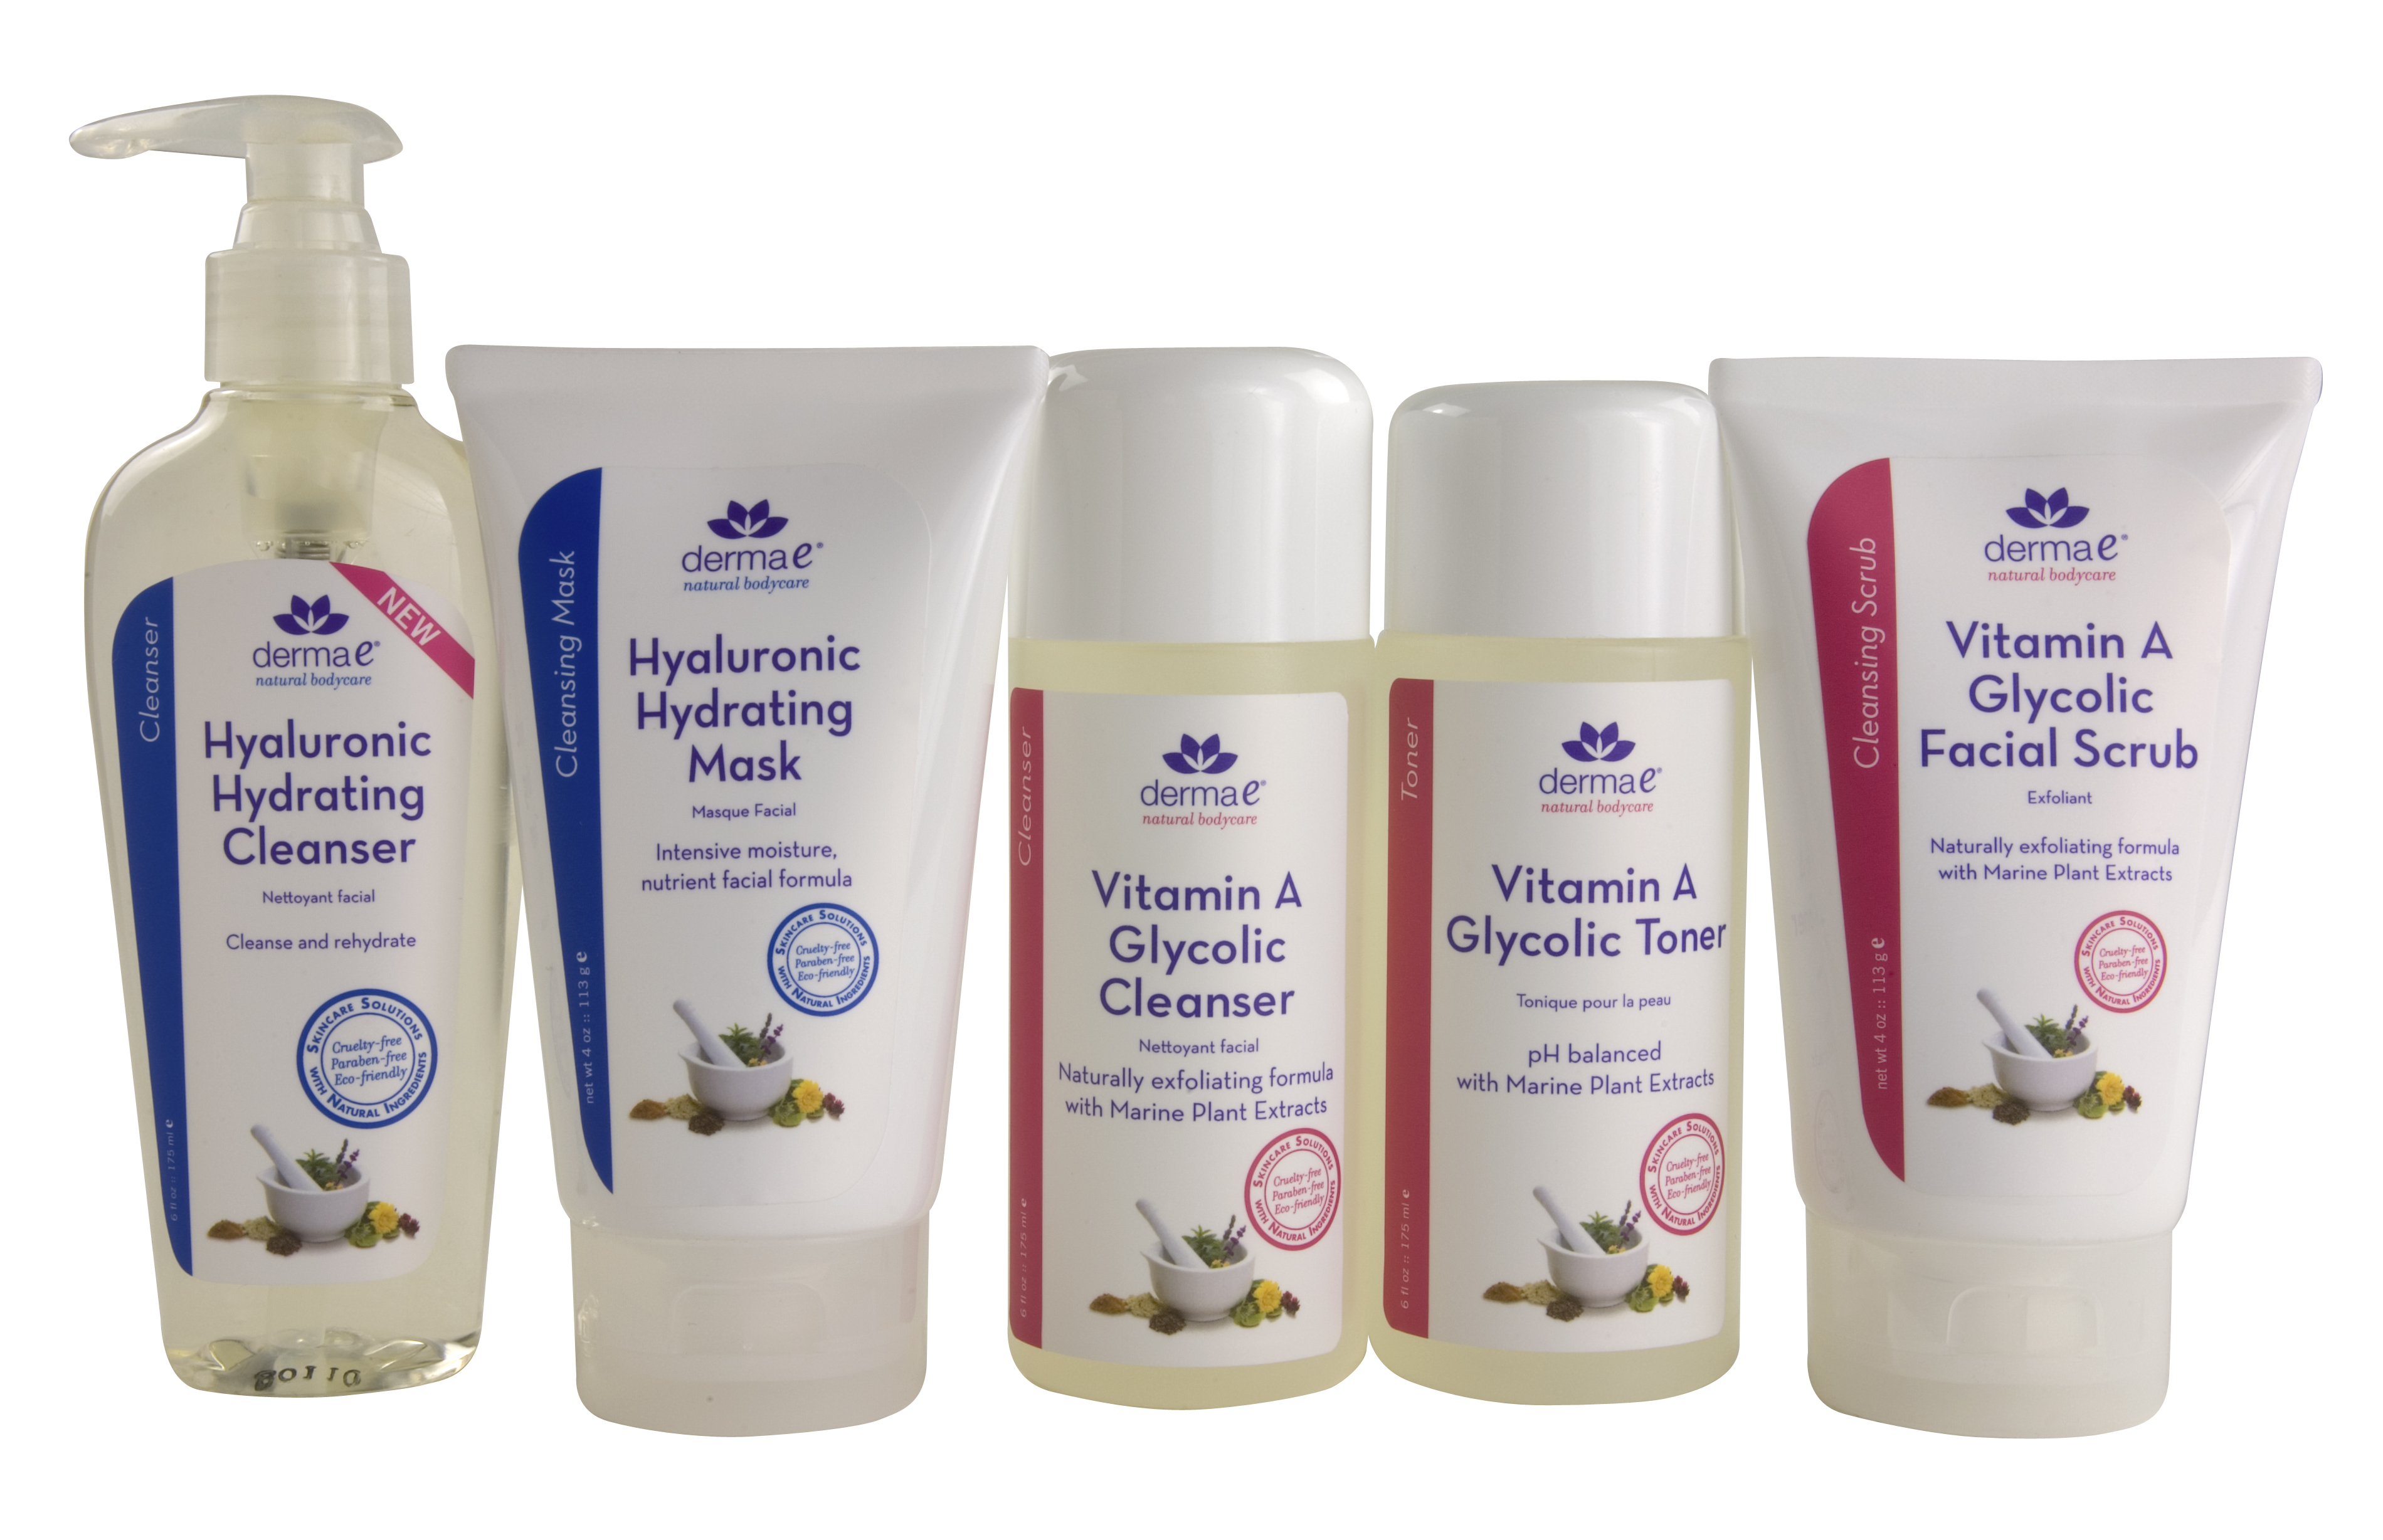 derma e Introduces New Products Featuring Hyaluronic Acid and Vitamin A, MASSAGE Magazine